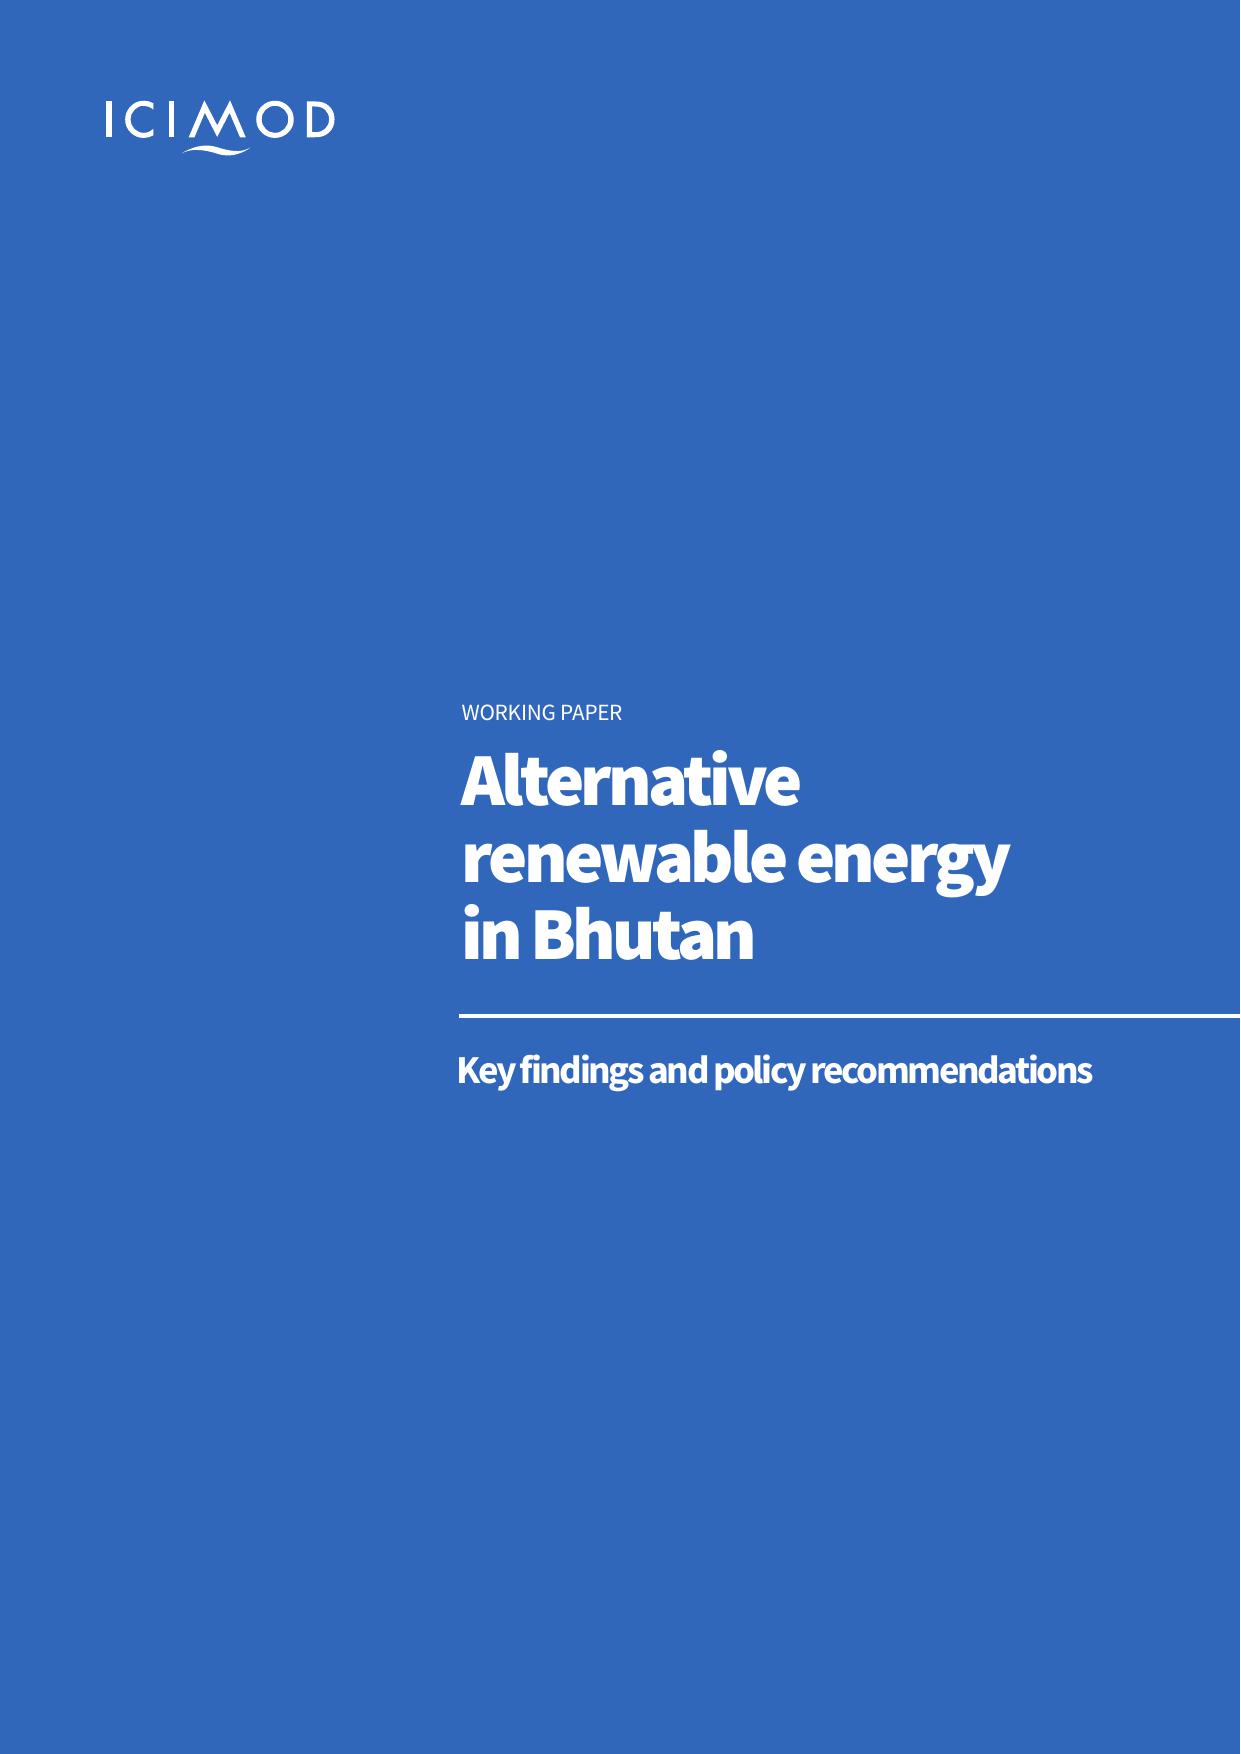 Alternative renewable energy in Bhutan: Key findings and policy recommendations